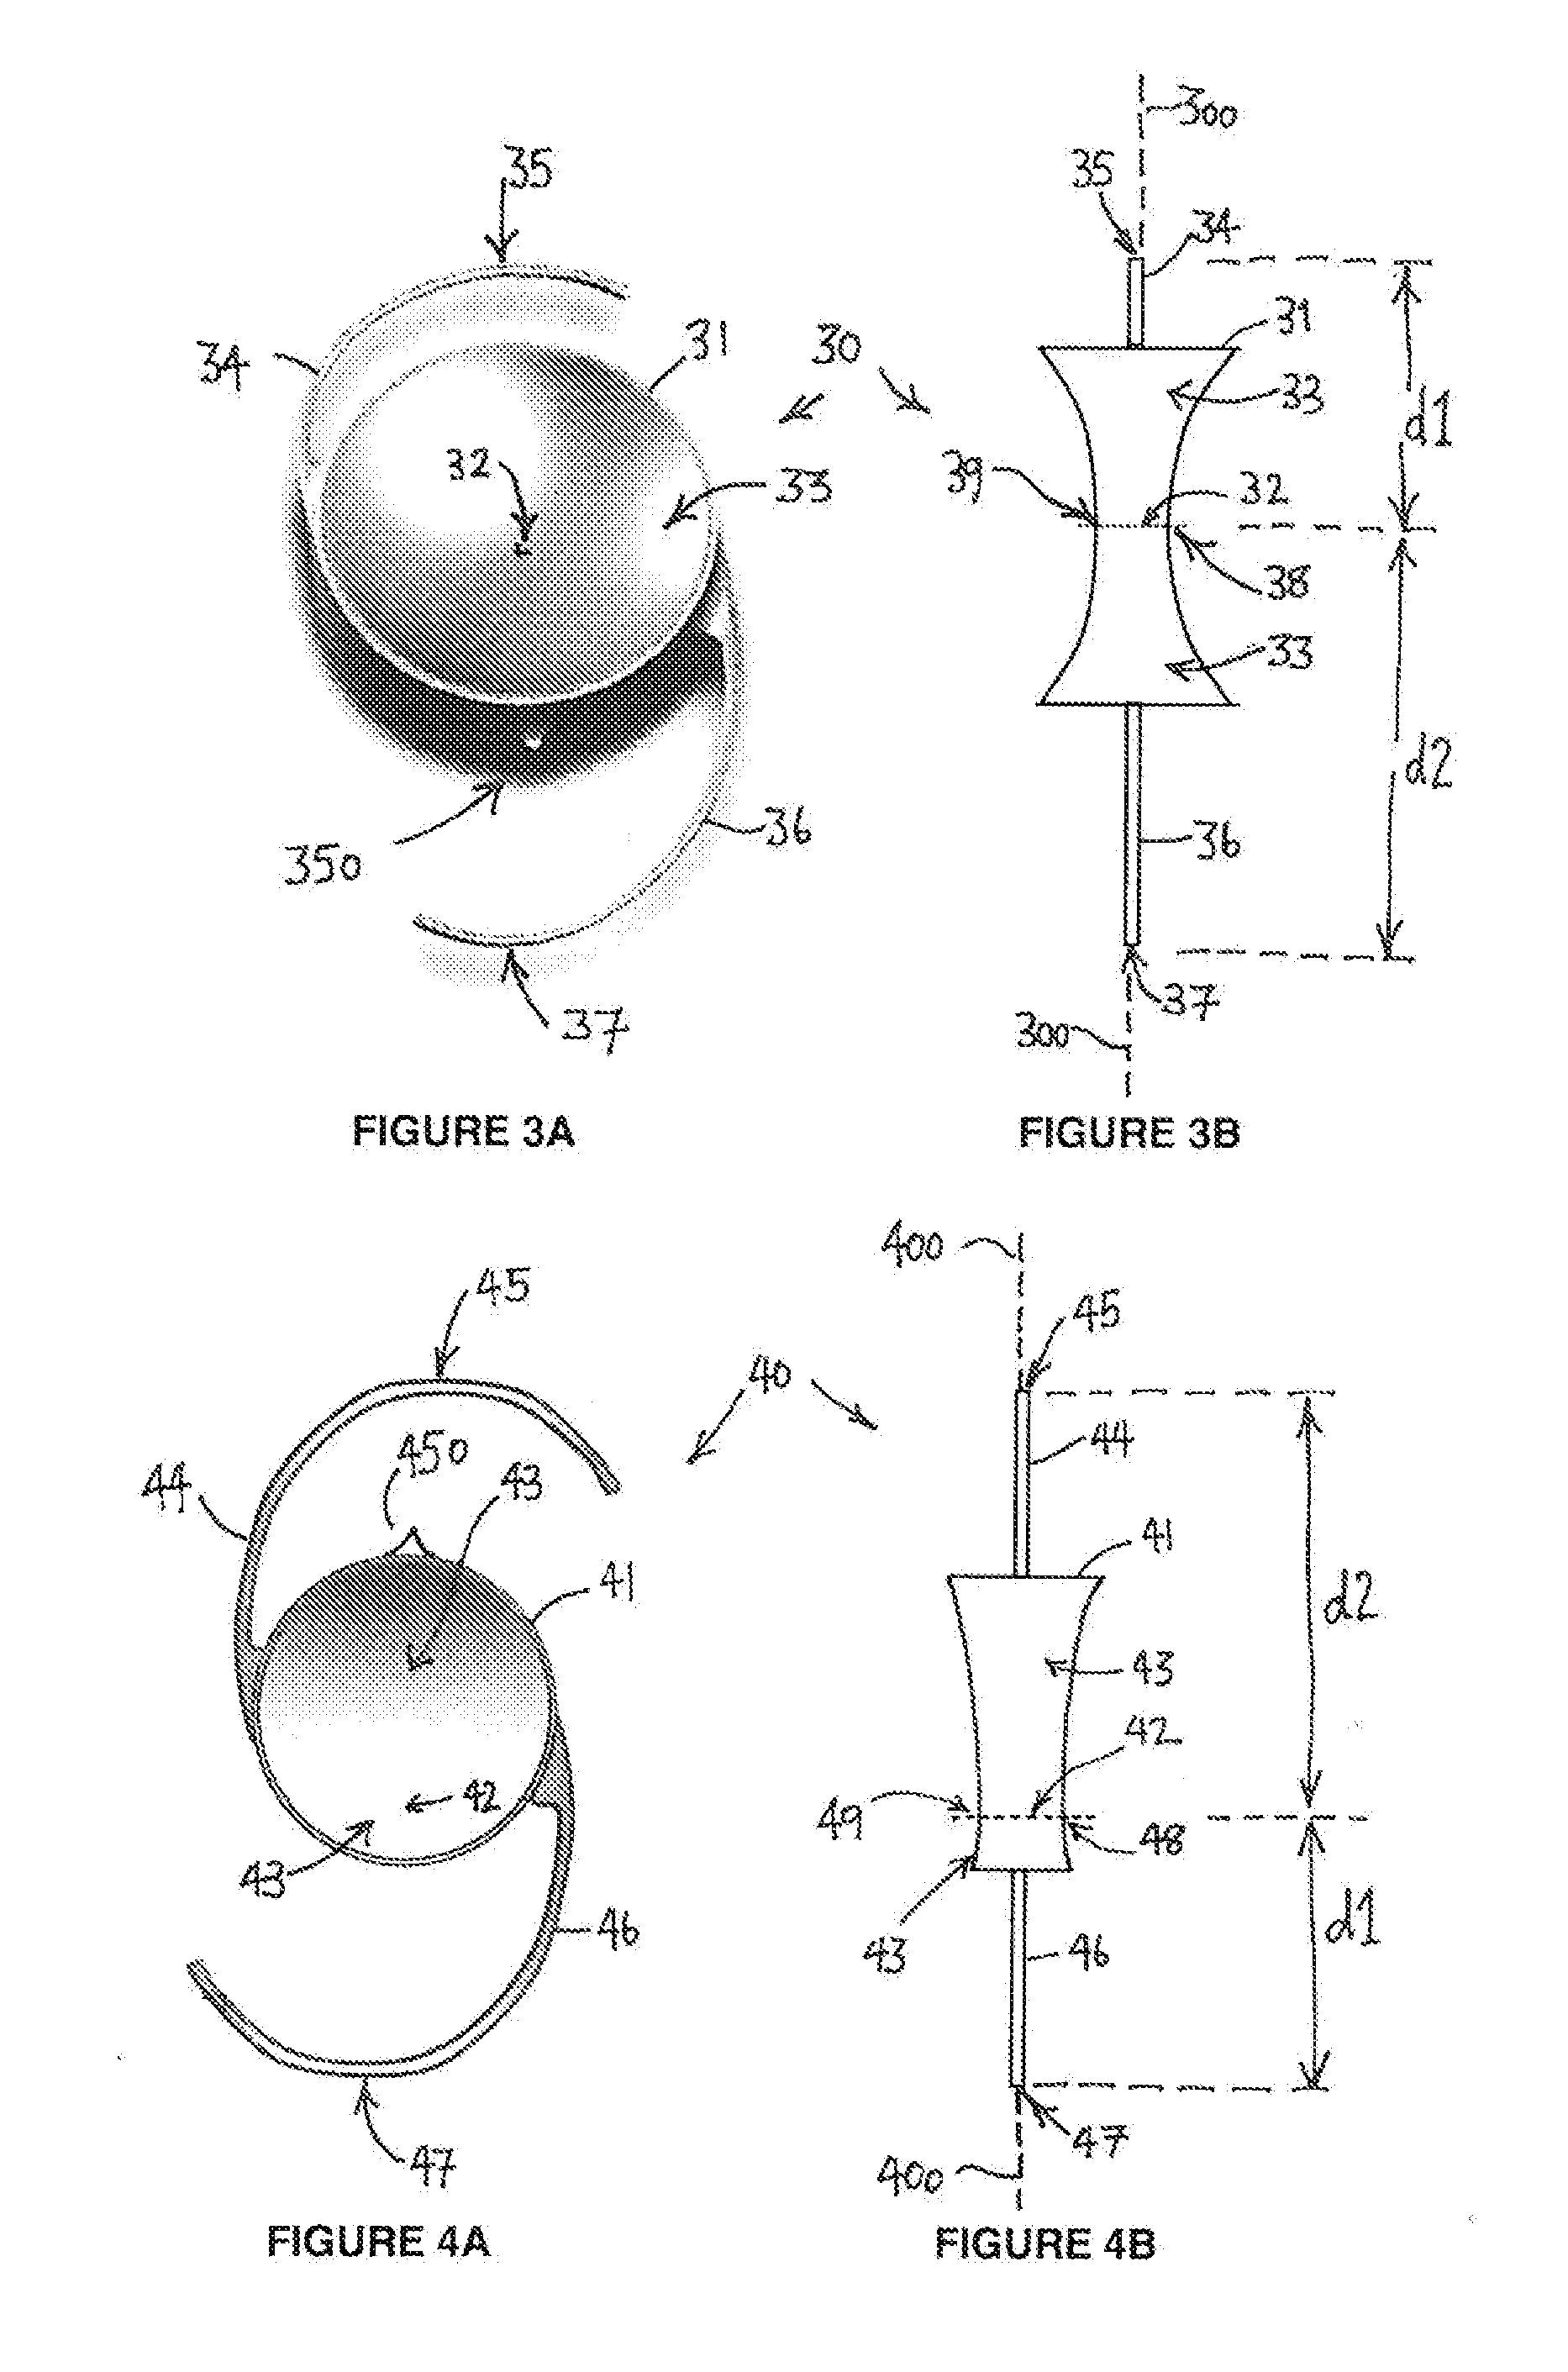 Intraocular lens systems and methods